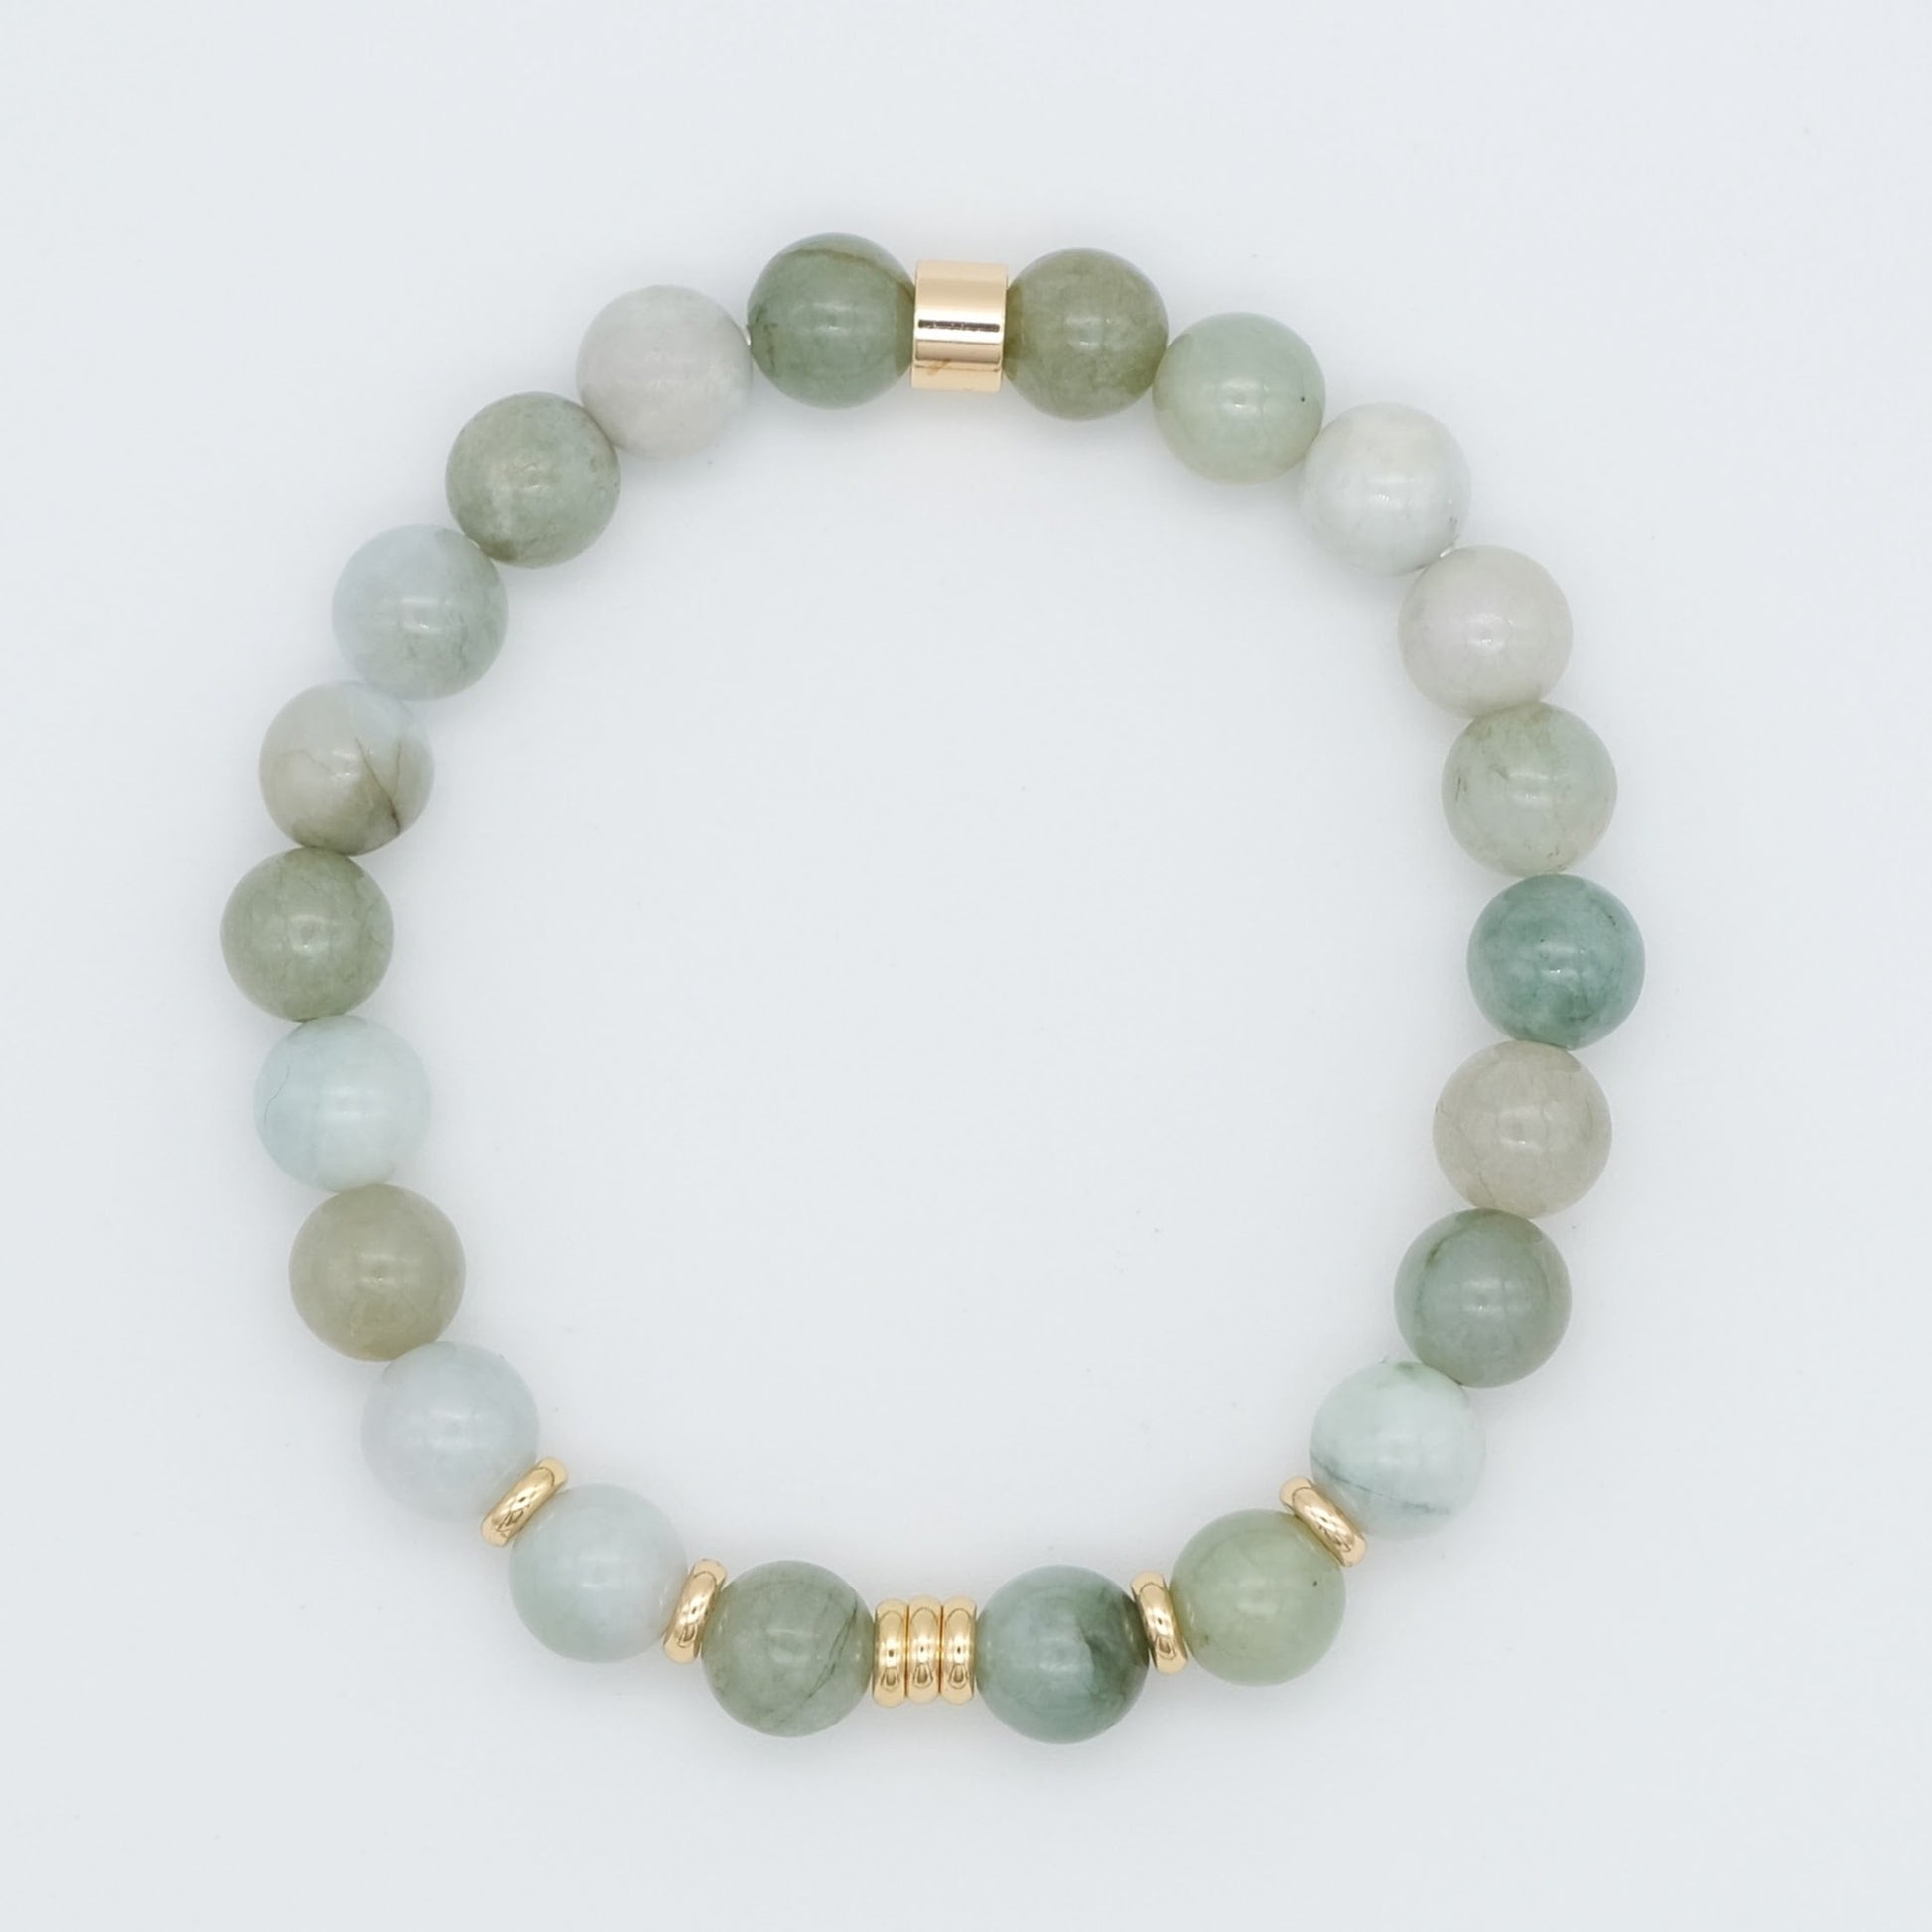 A jade gemstone bracelet with gold plated accessories from above